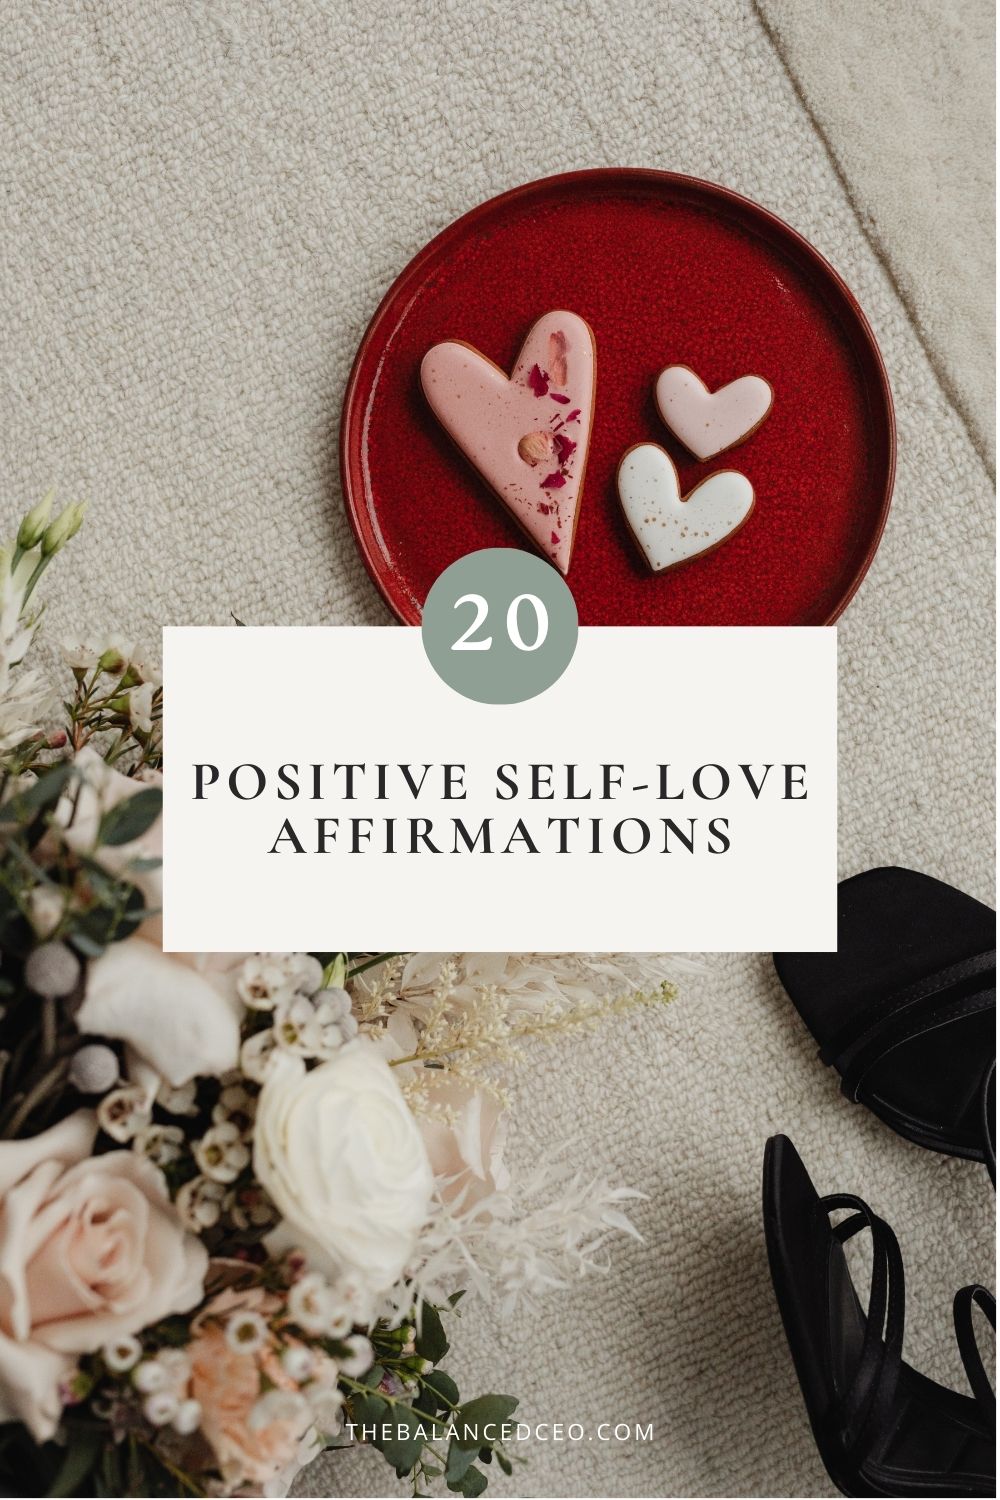 20 Powerful Positive Affirmations for Self-Love